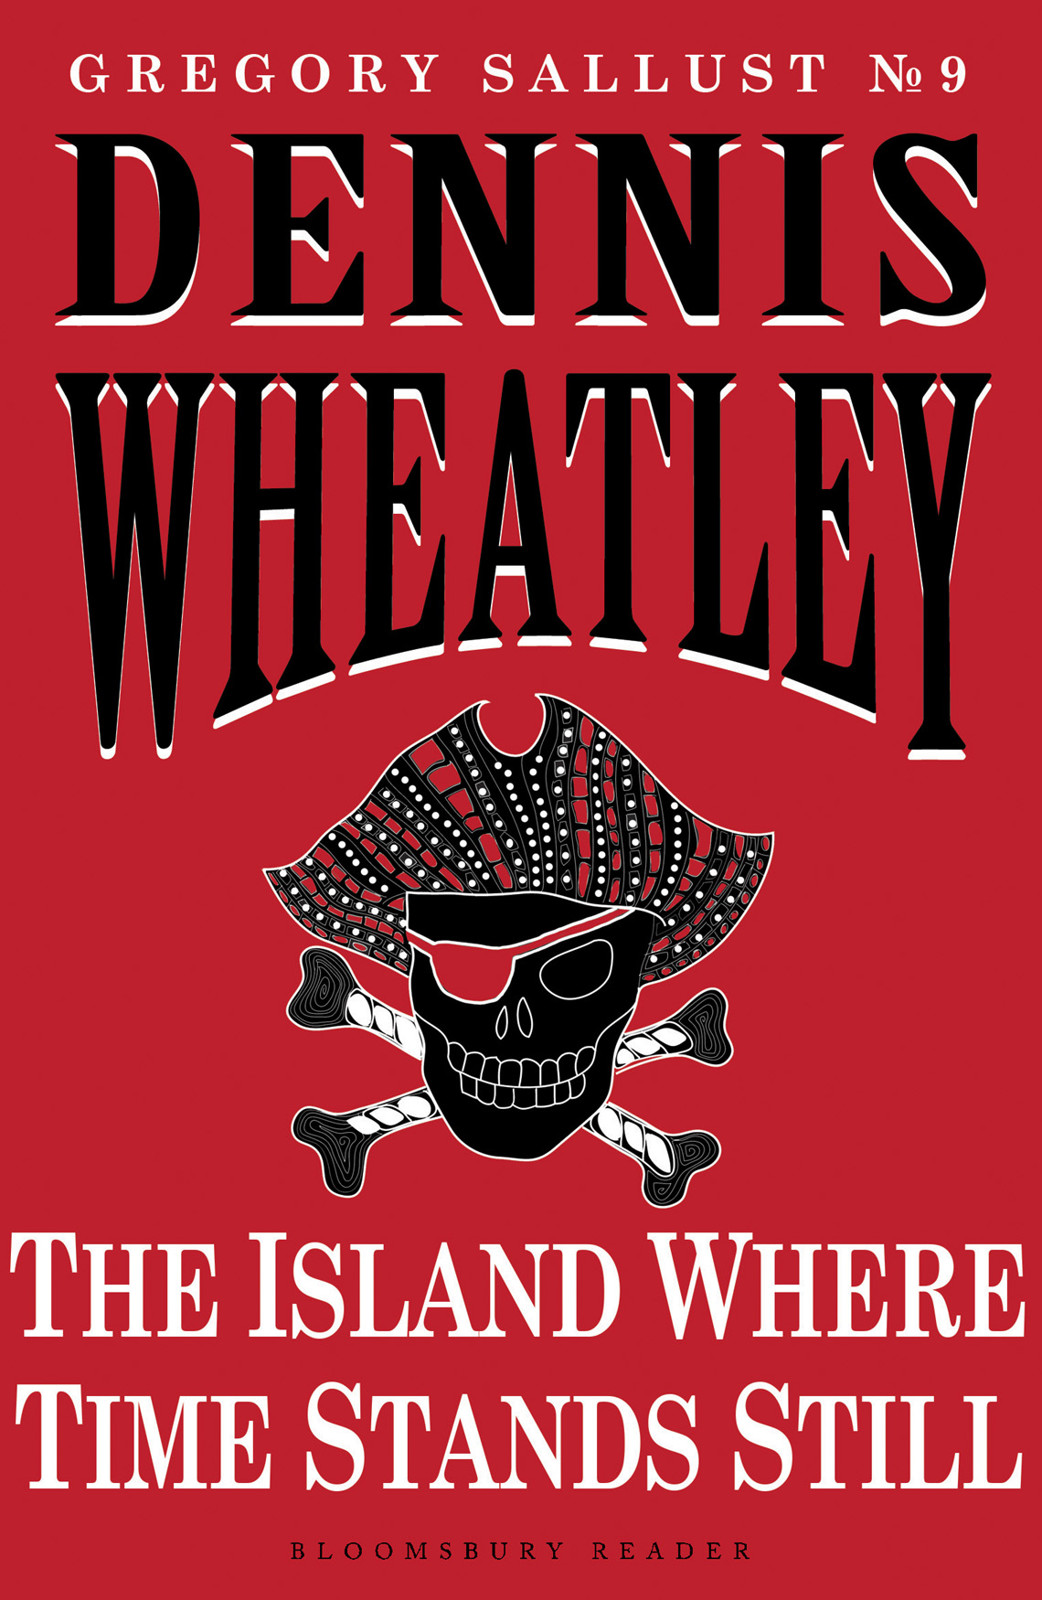 The Island Where Time Stands Still by Dennis Wheatley